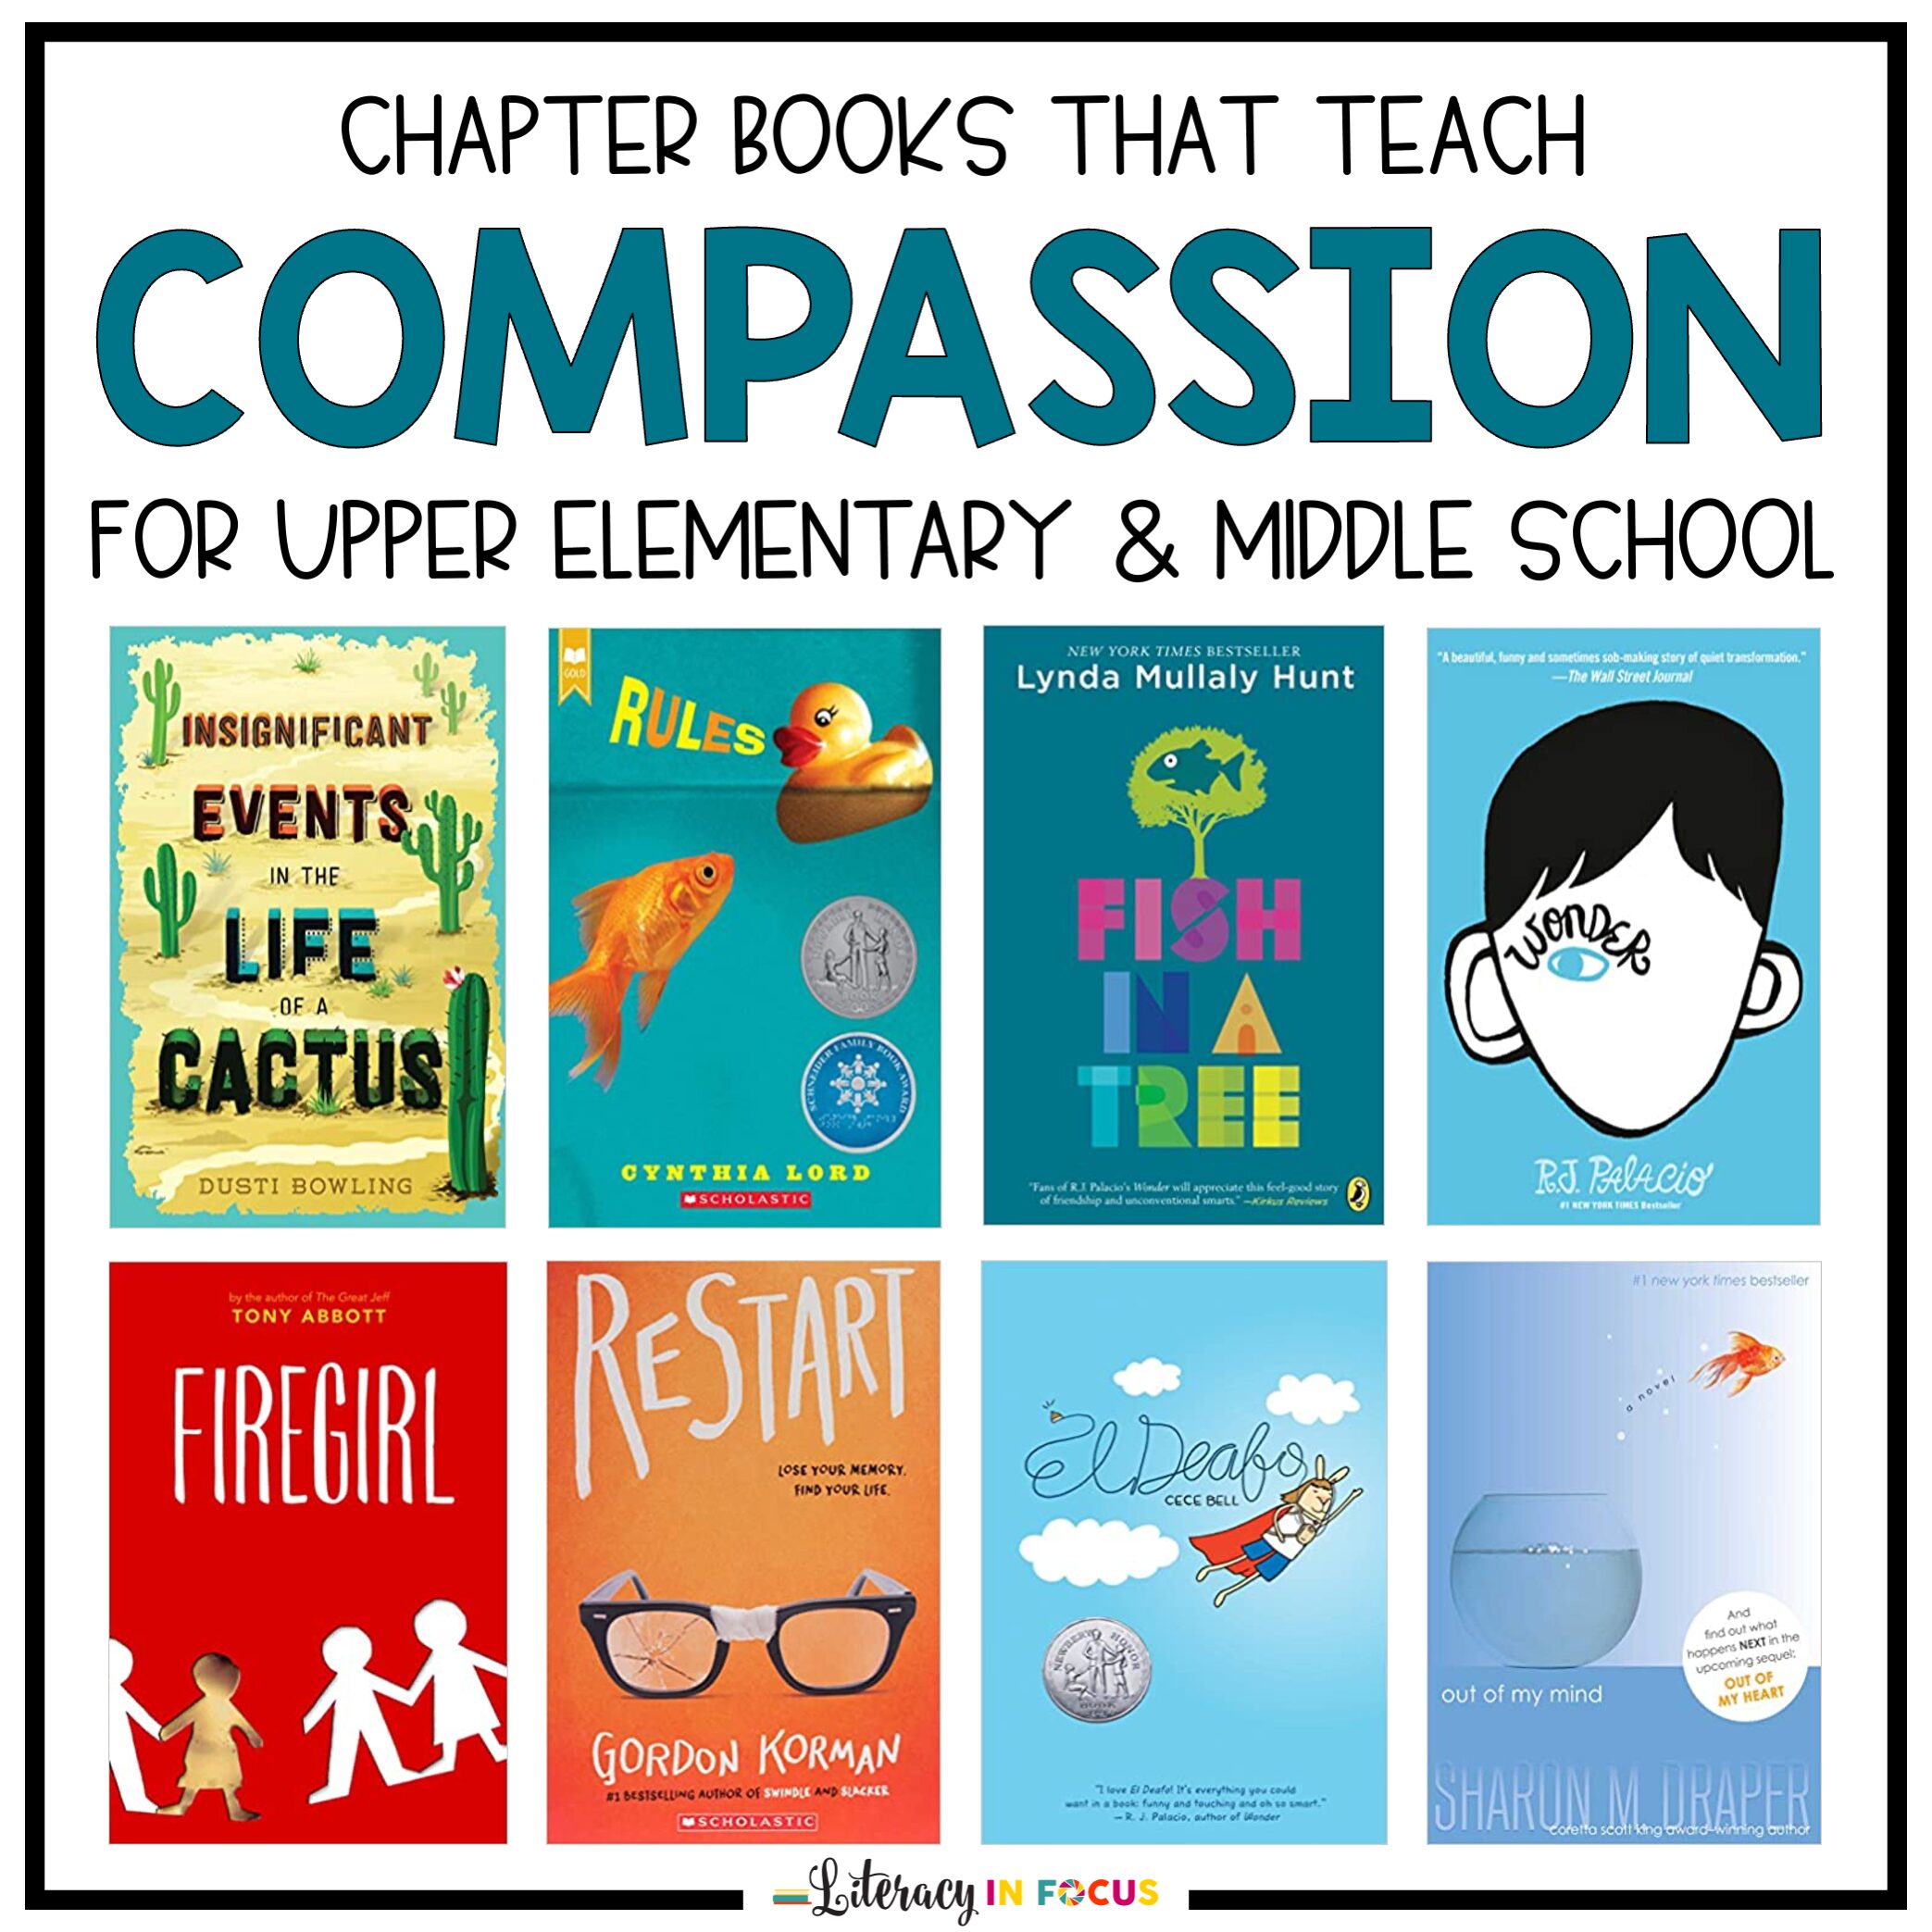 Chapter Books the Teach Compassion and Kindness